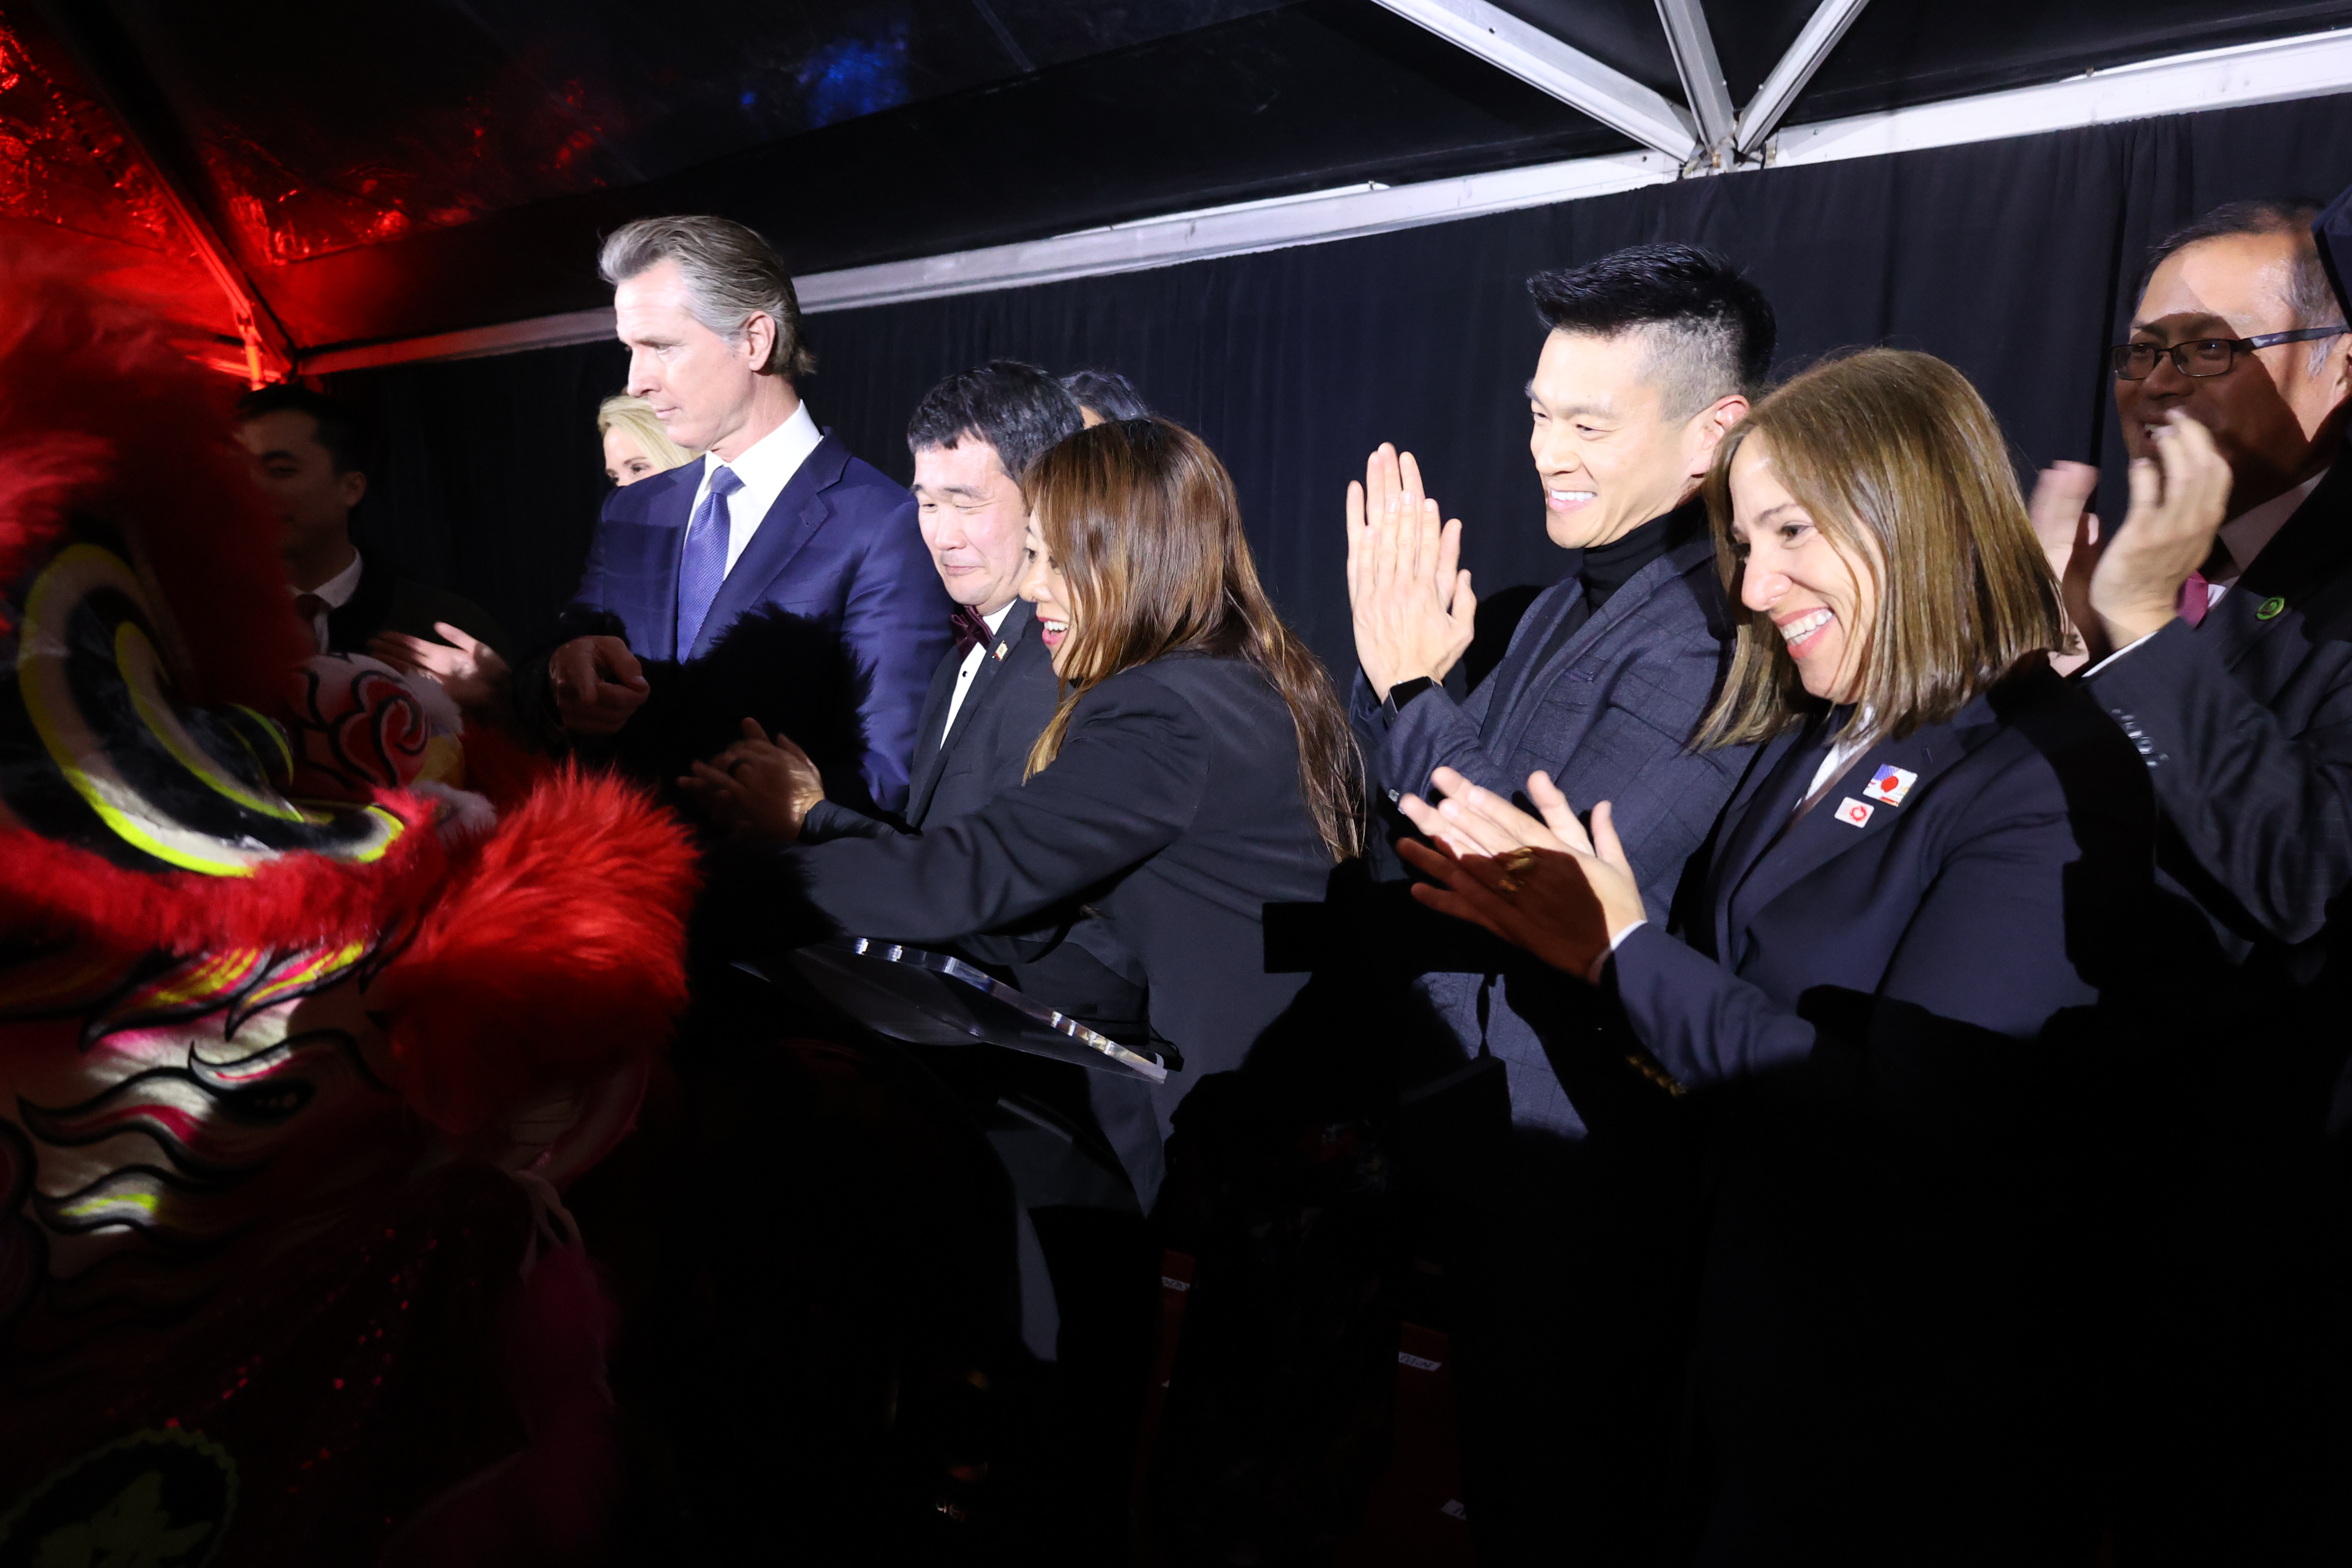 Image of Lt. Governor Kounalakis with Governor Newsom and other state officials to celebrate Lunar New Year